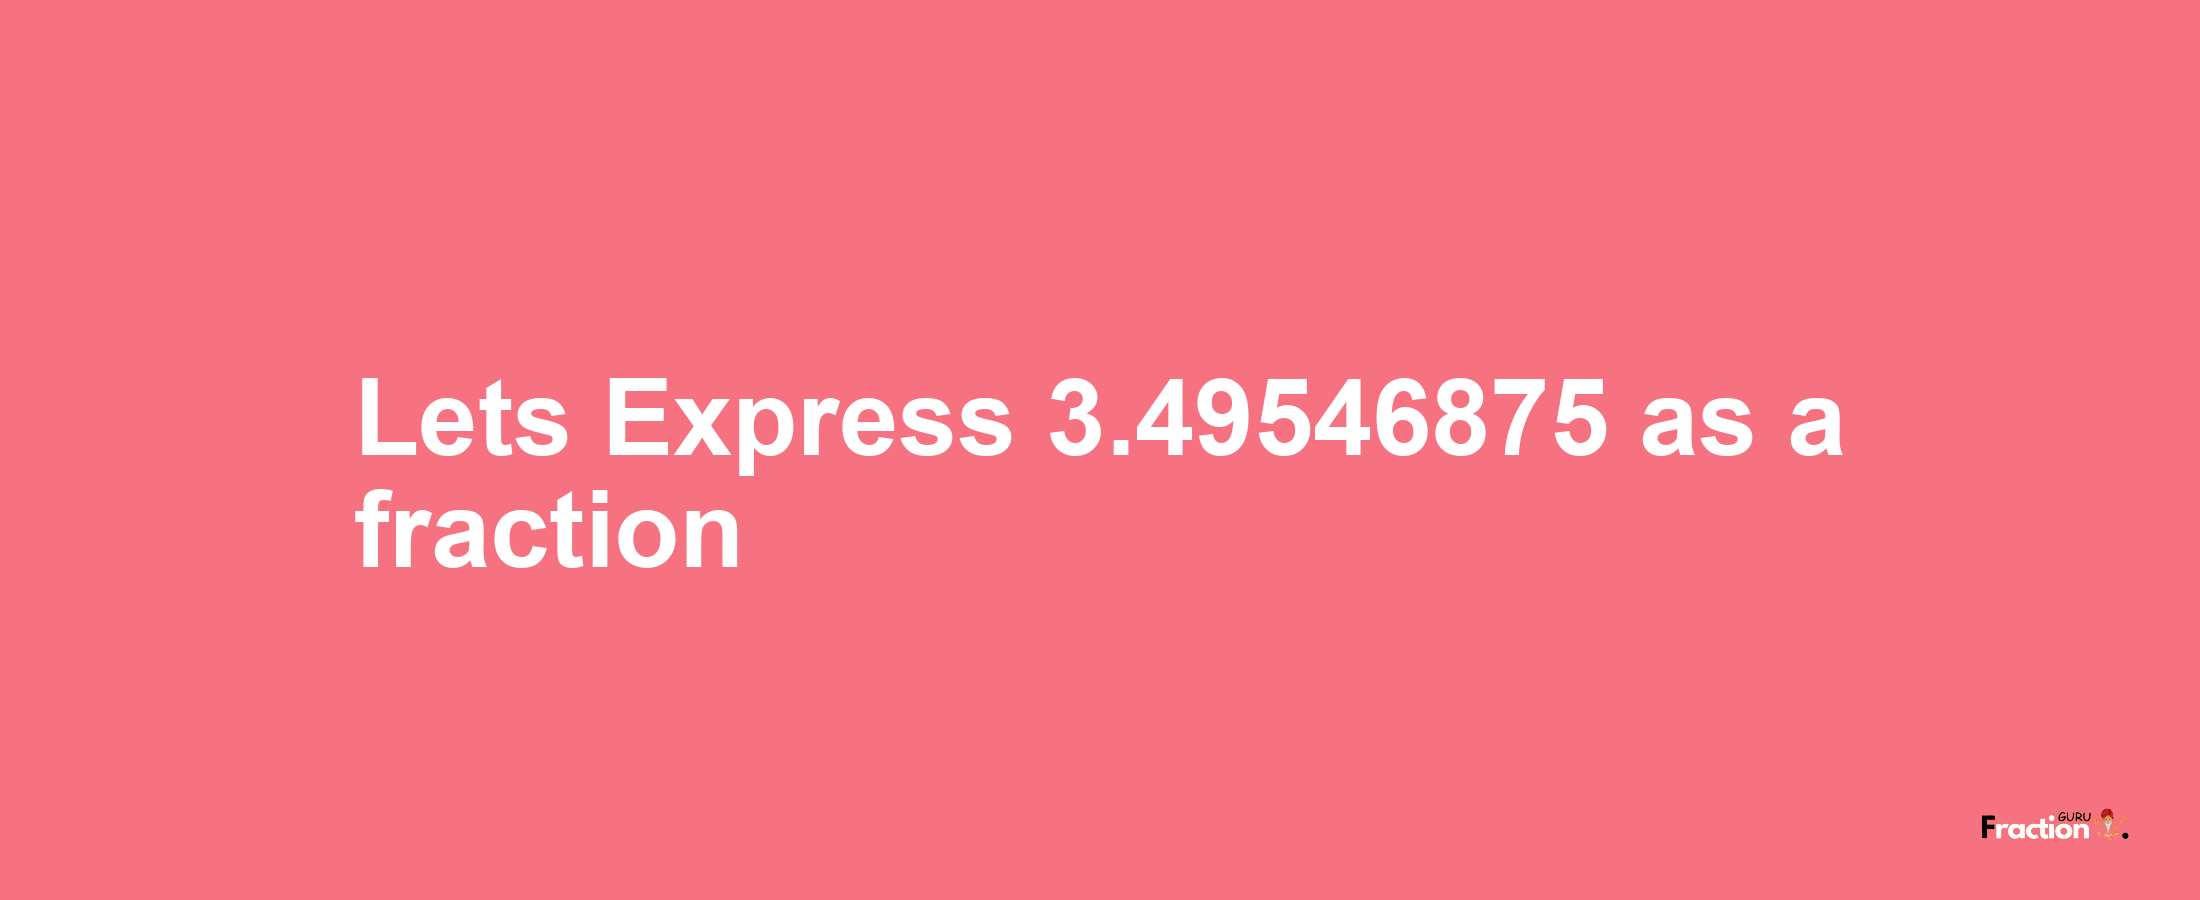 Lets Express 3.49546875 as afraction